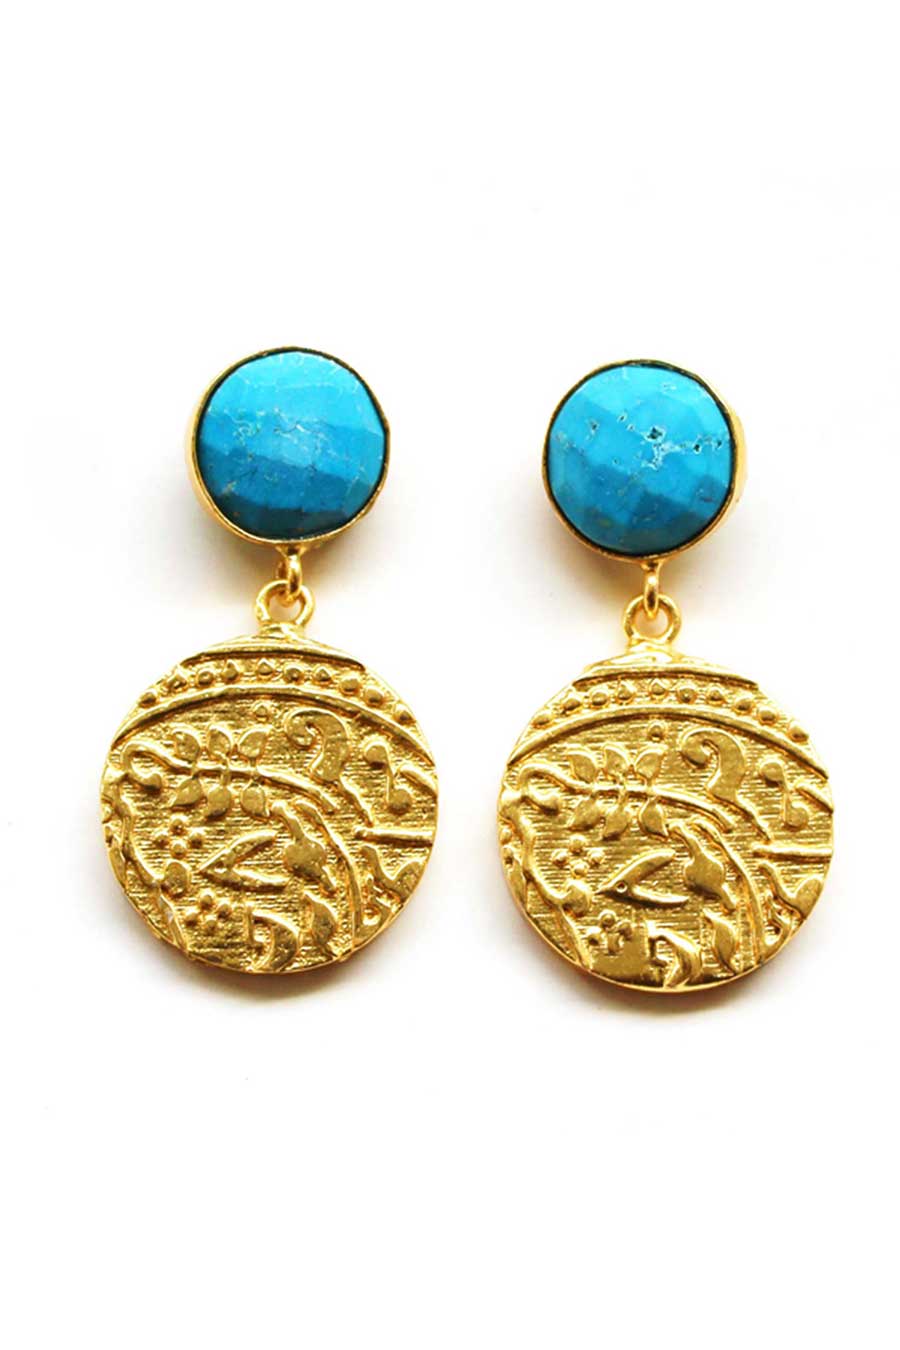 Vintage Coin Drop Earrings with Turquoise Quartz